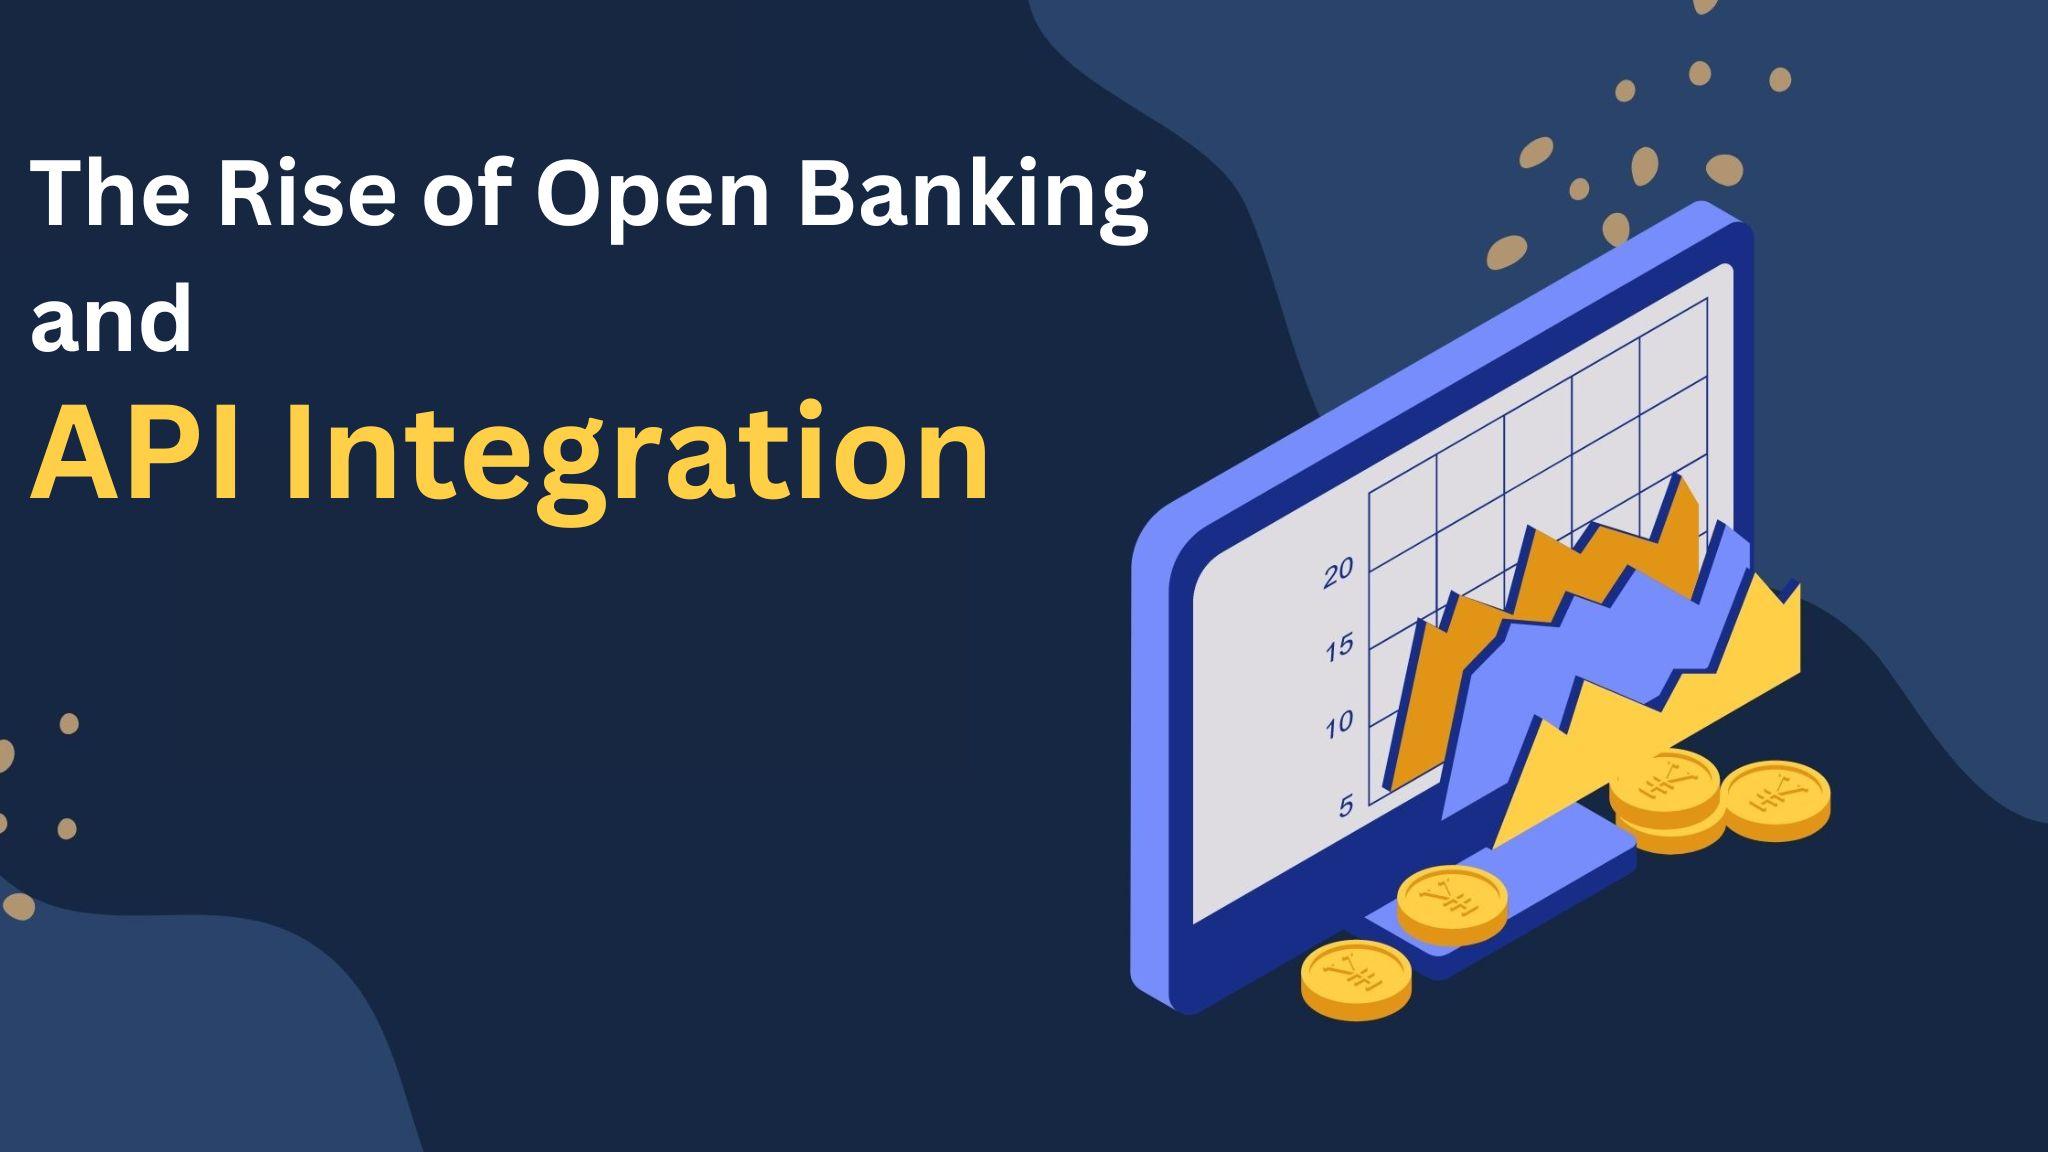 The Rise of Open Banking and API Integration